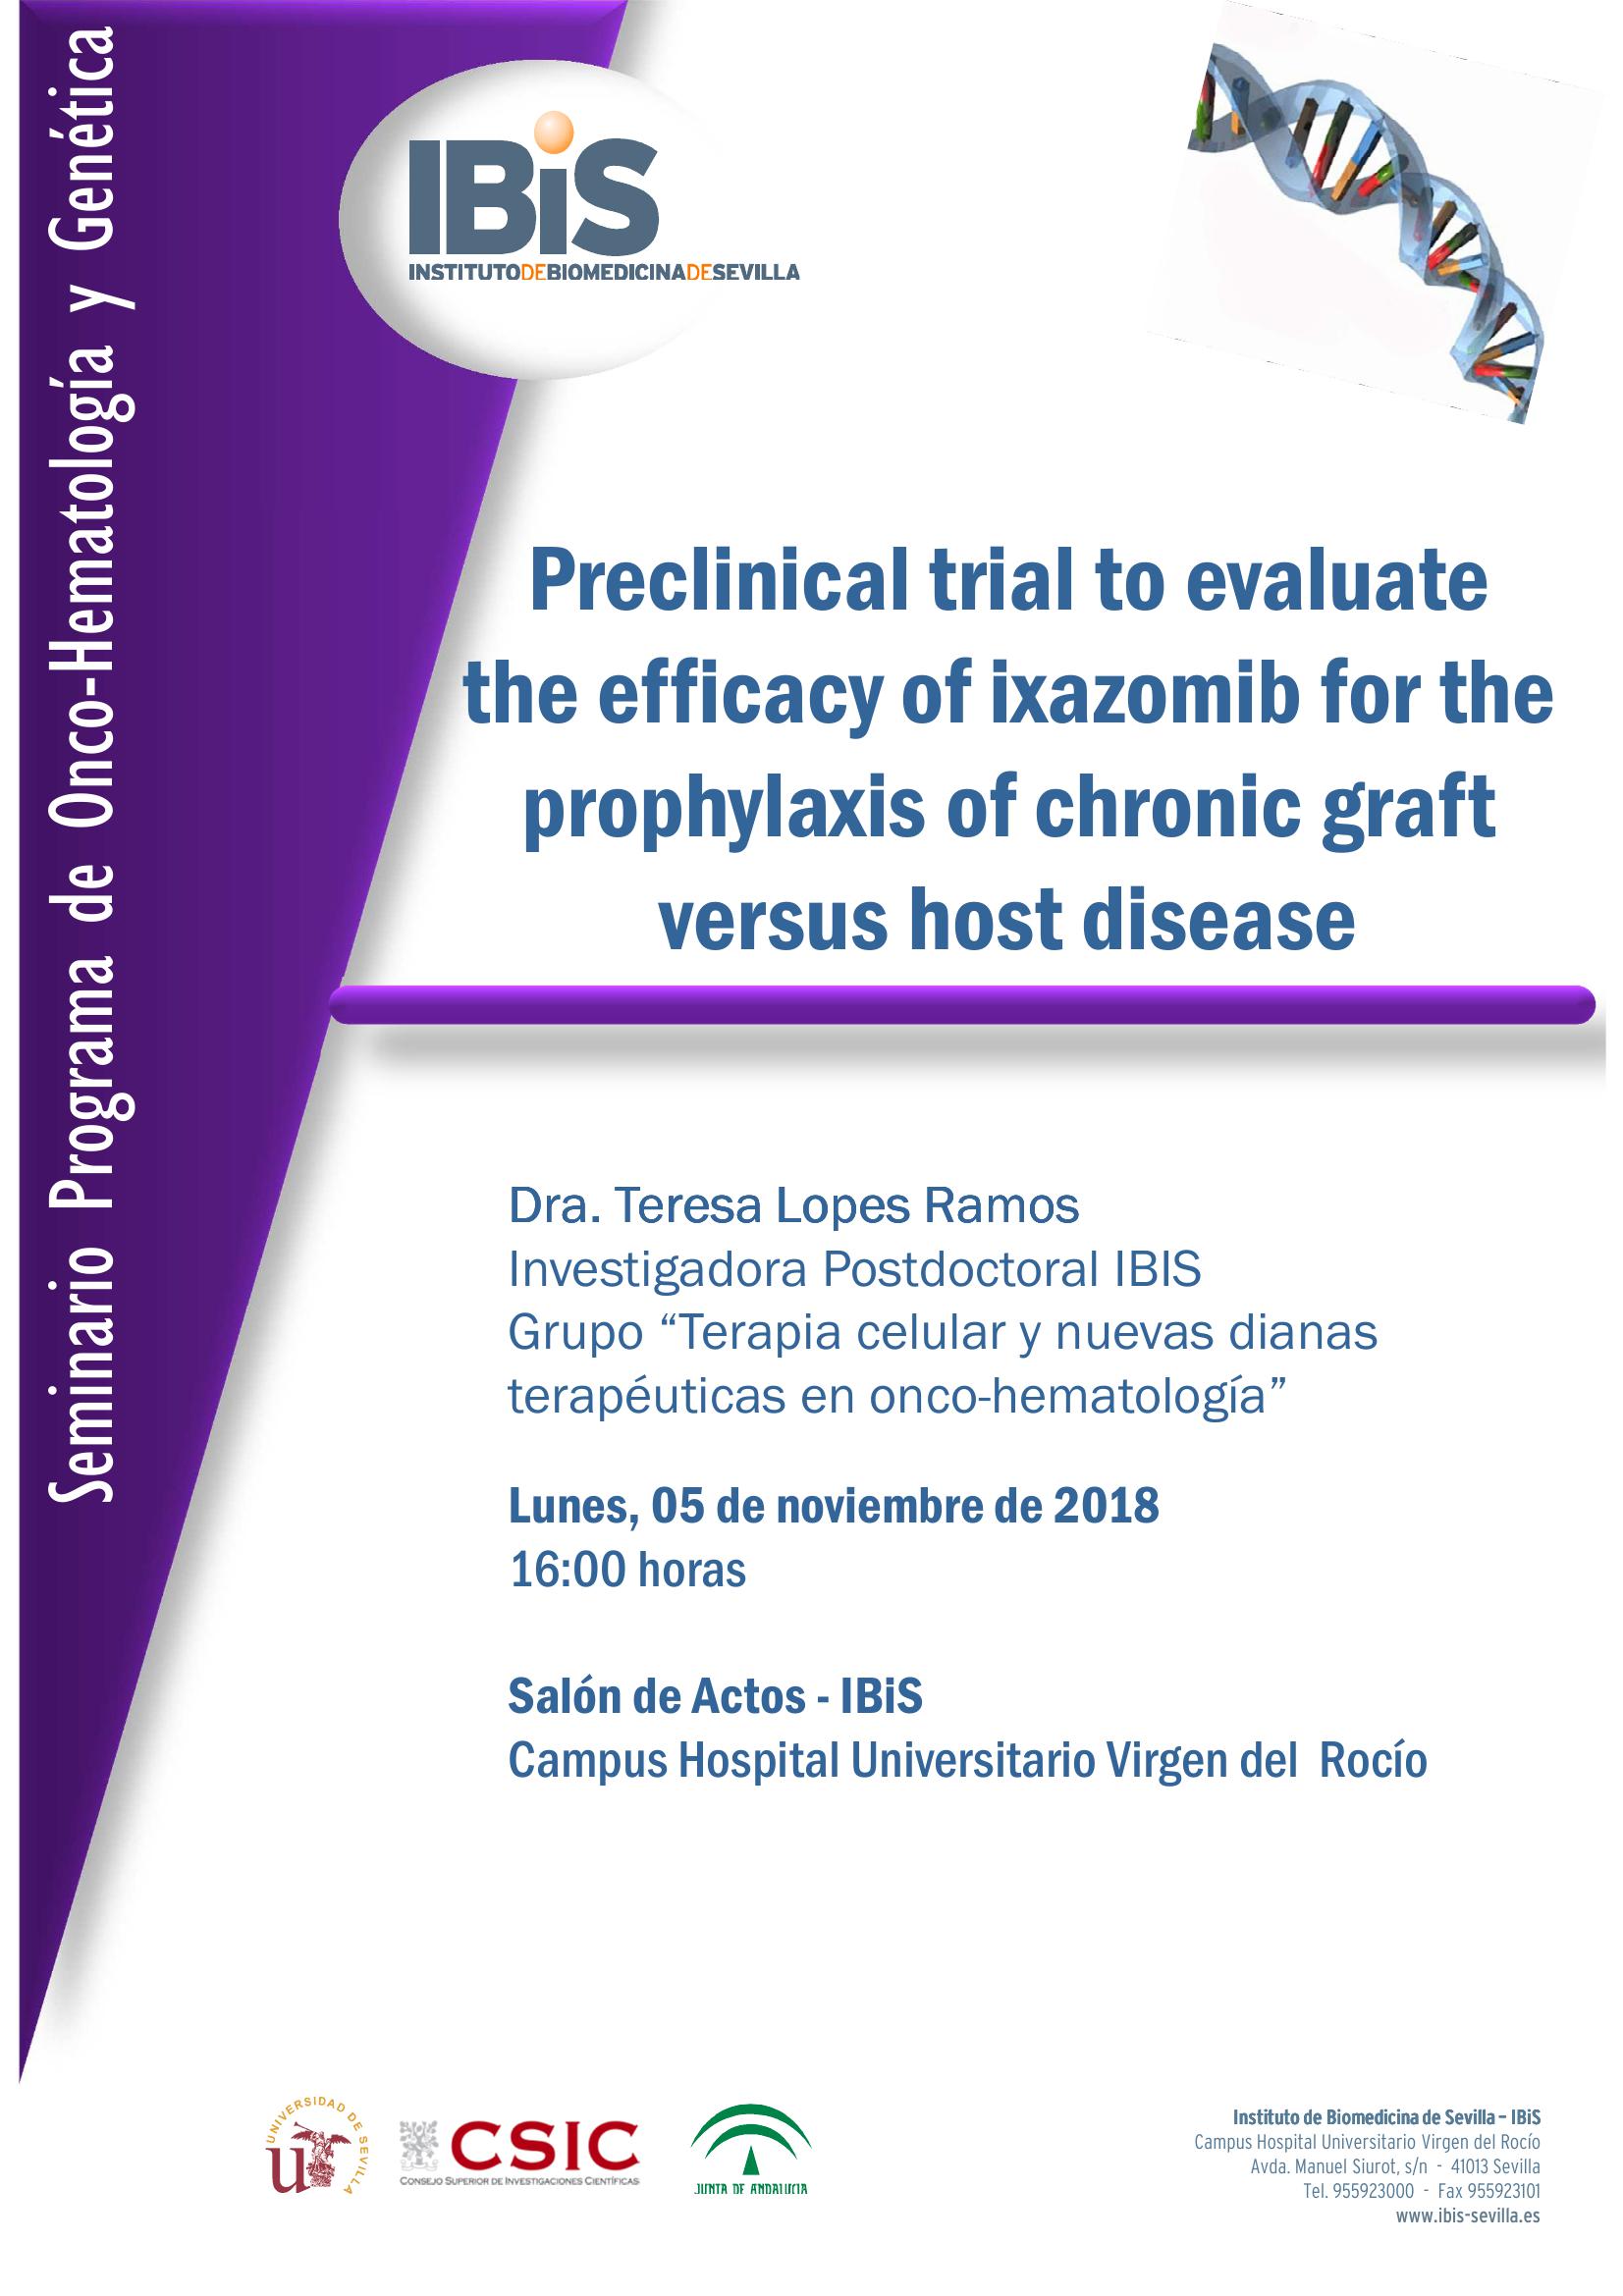 Poster: Preclinical trial to evaluate the efficacy of ixazomib for the prophylaxis of chronic graft versus host disease